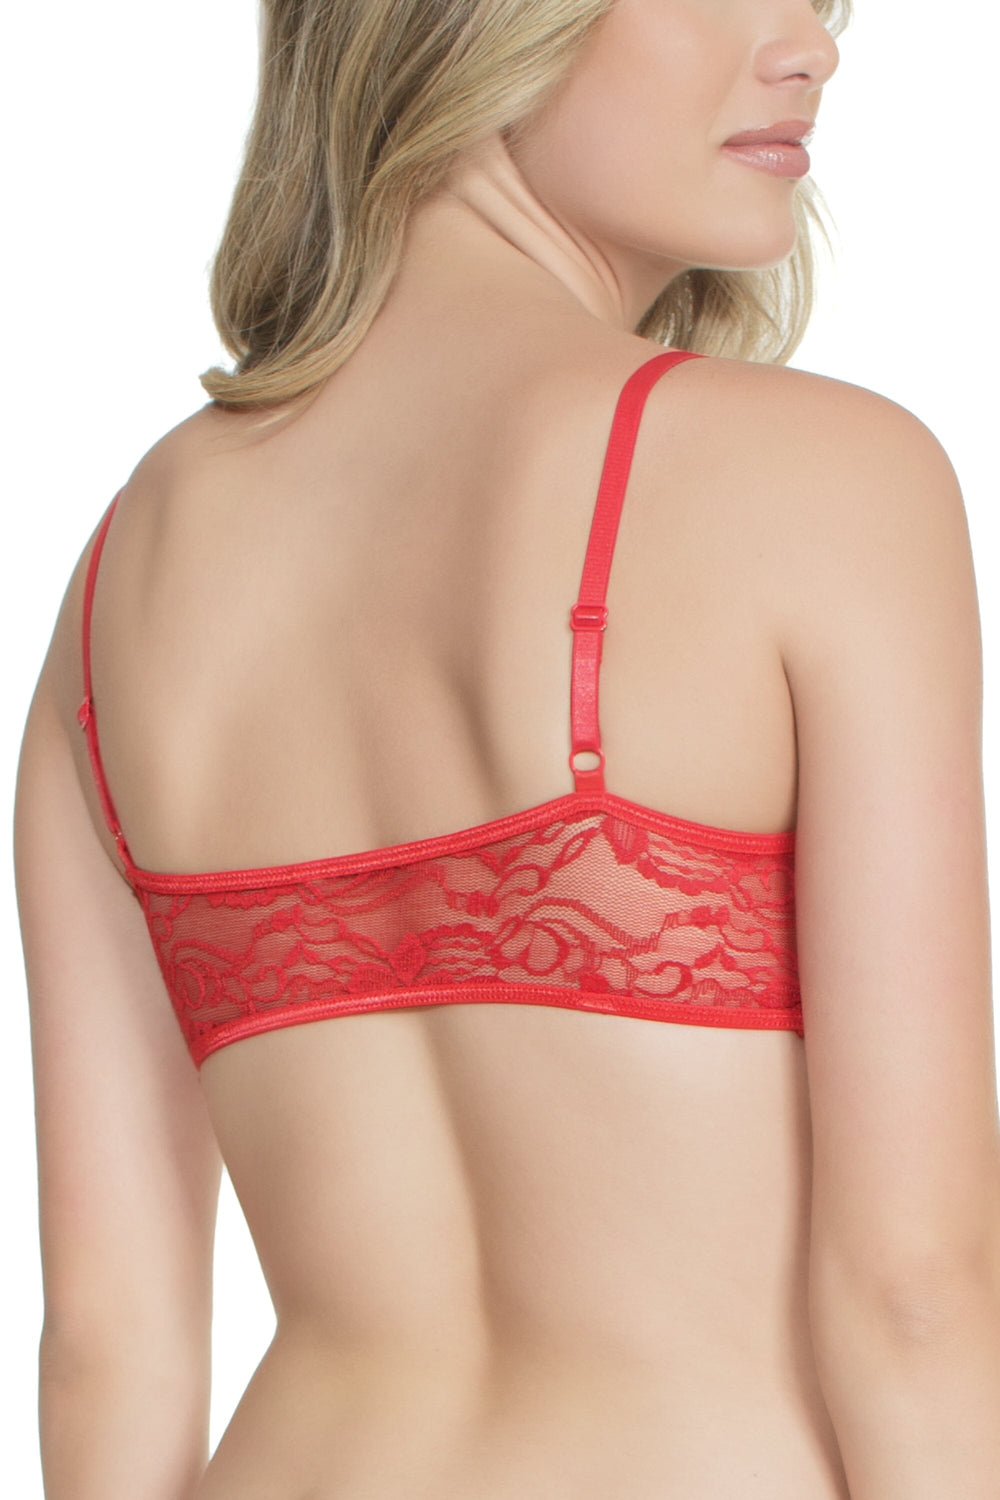 1 PC. Stretch Lace Bralette-Bras-Coquette-Red-O/S-SEXYSHOES.COM